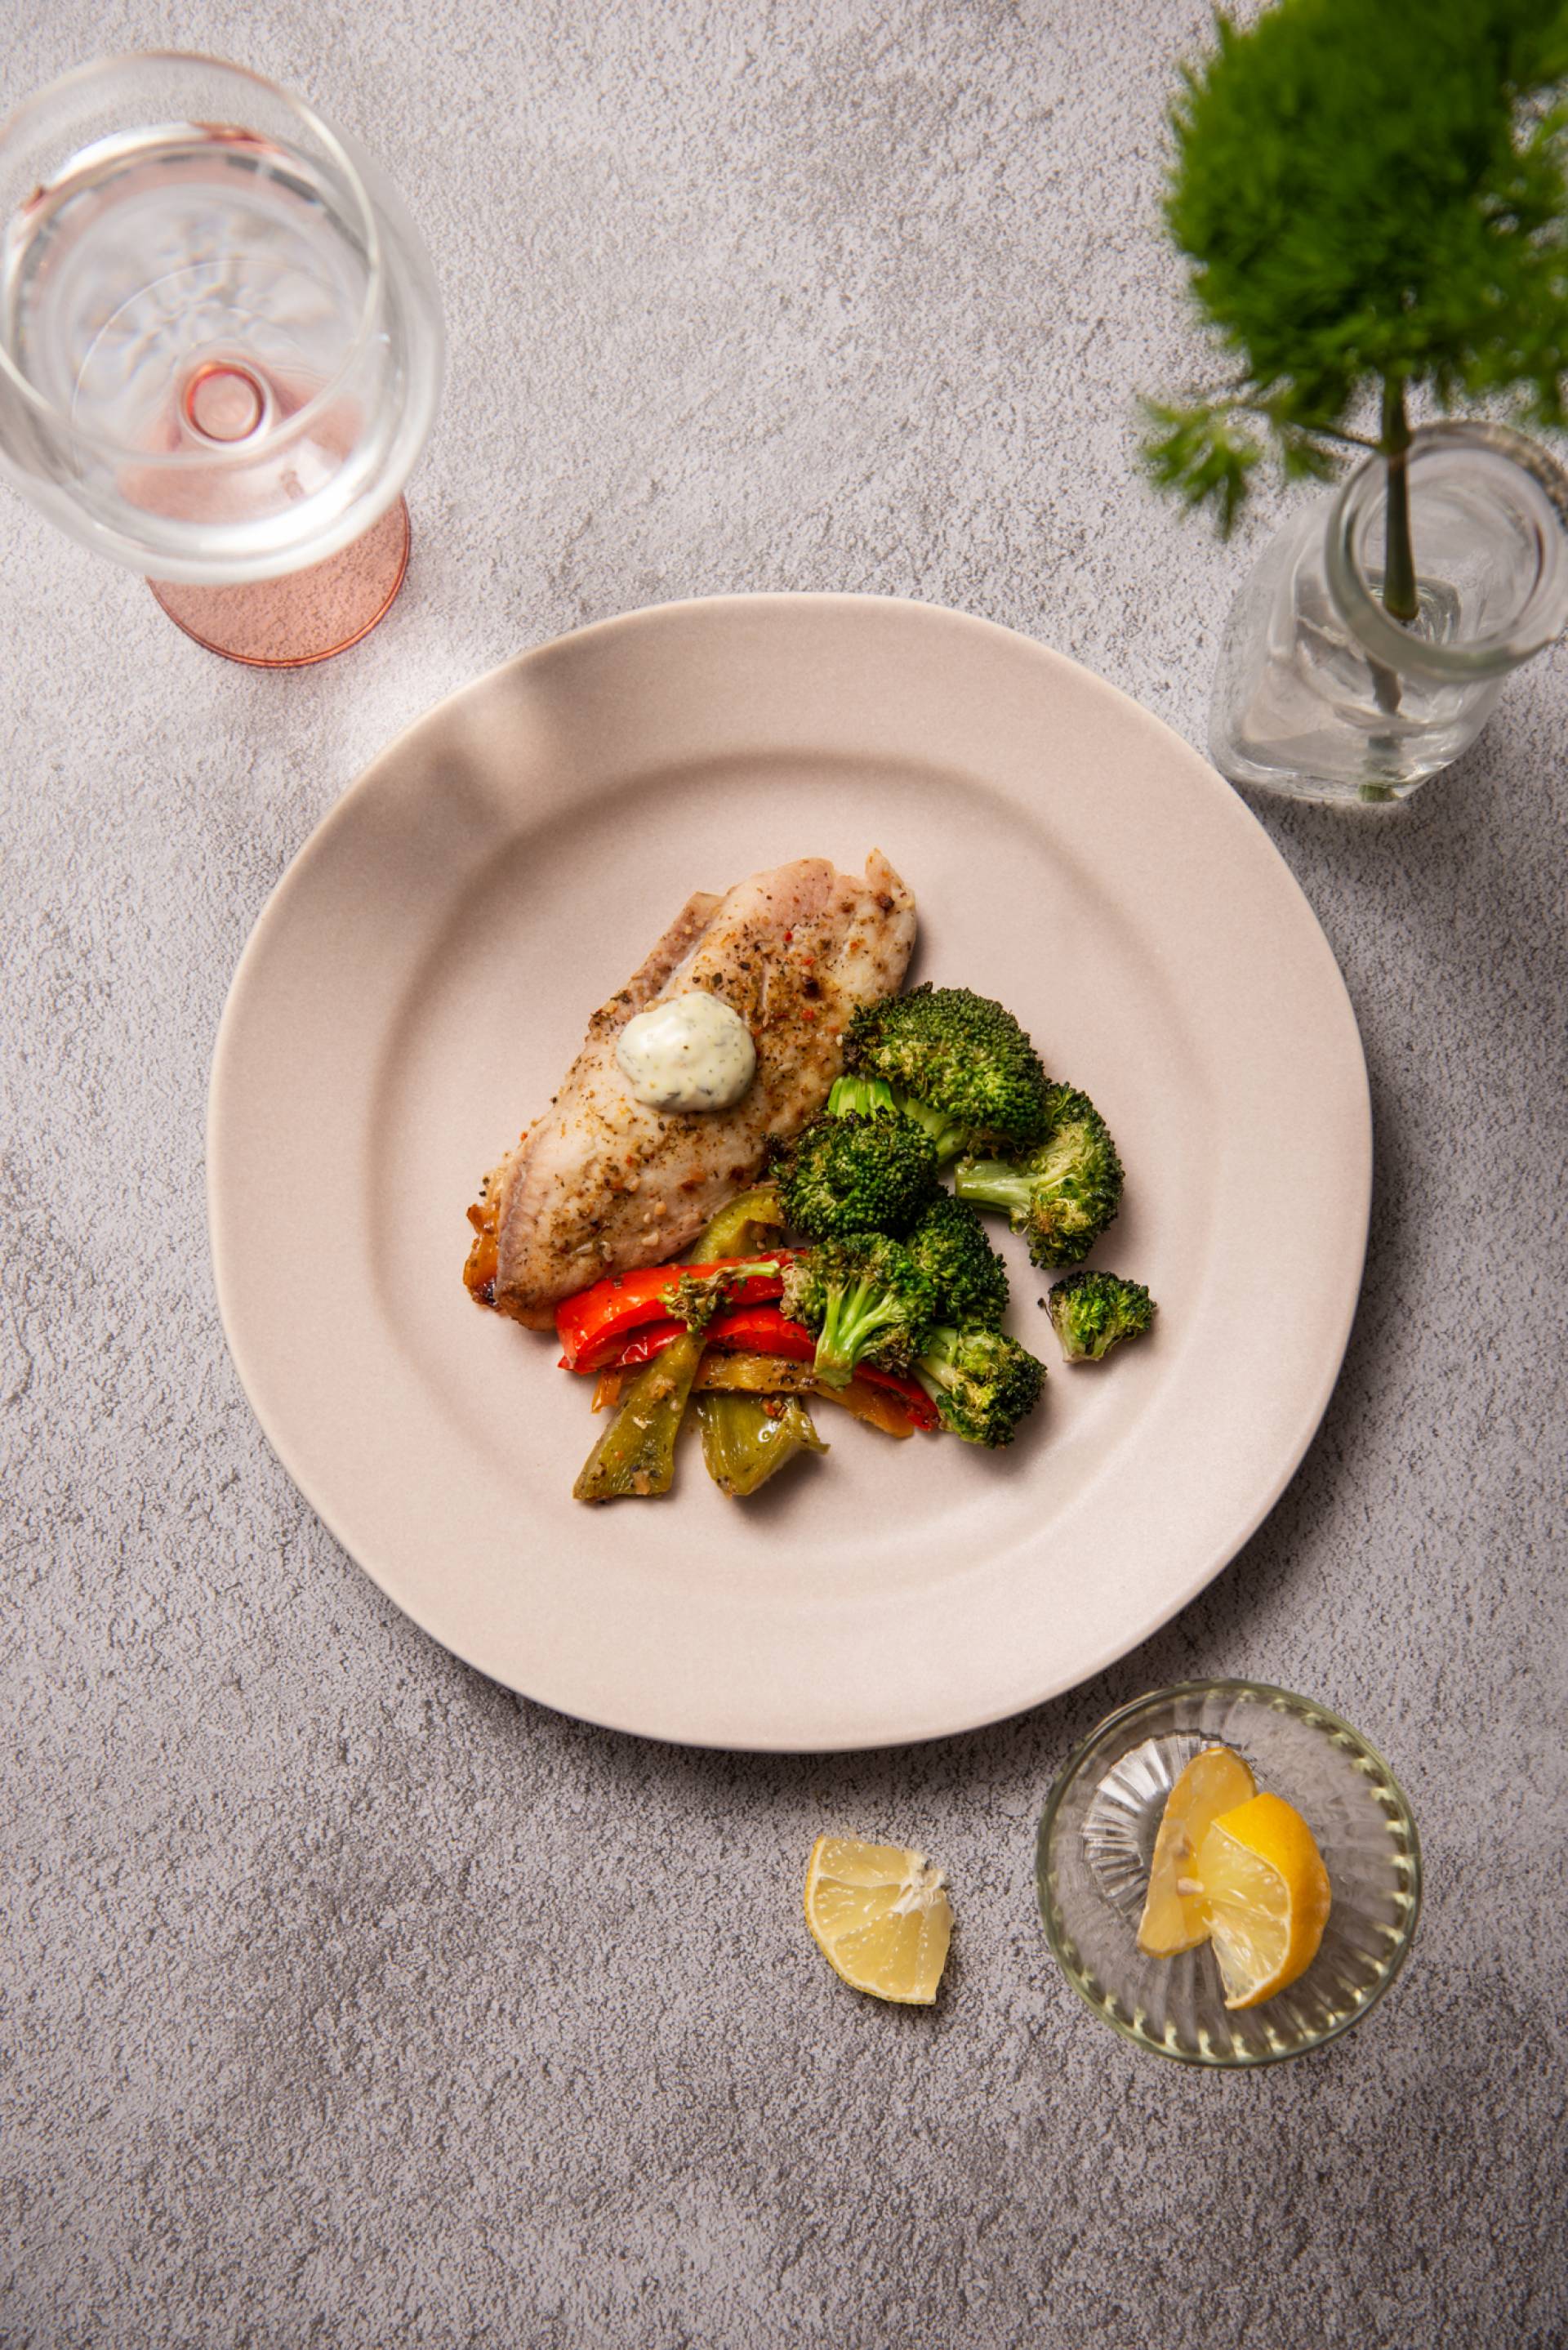 FITNESS: Baked Tilapia with Lemon Dill Aioli (LOW CARB)